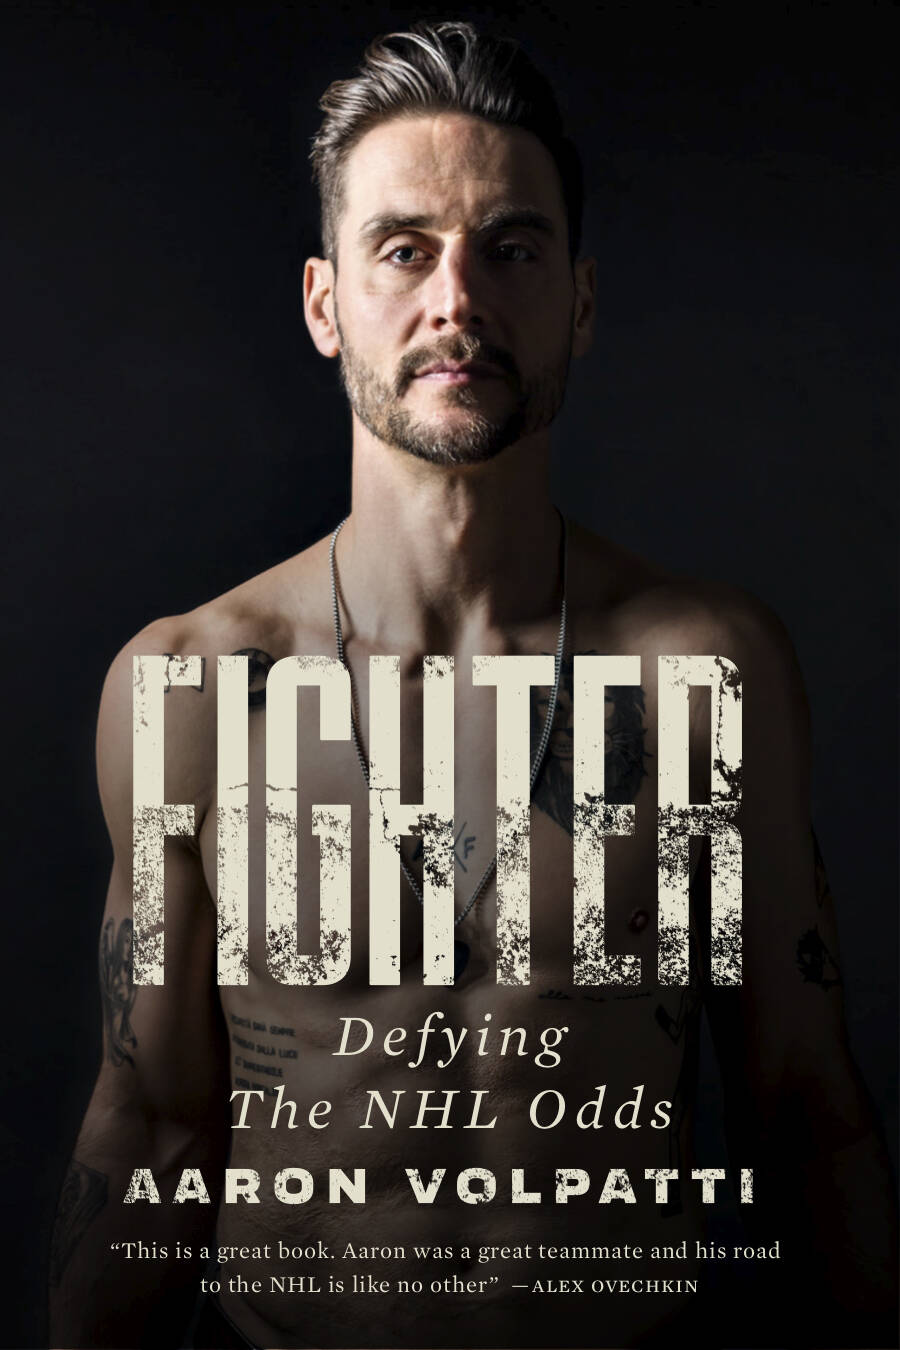 On his website, Volpatti describes his book as: There is a fighter inside all of us. Discover the power of the human mind and what is possible through Aarons unique practice of visualization. A practice that was, and still is, an integral component to his recovery and success. (Contributed by Aaron Volpatti)